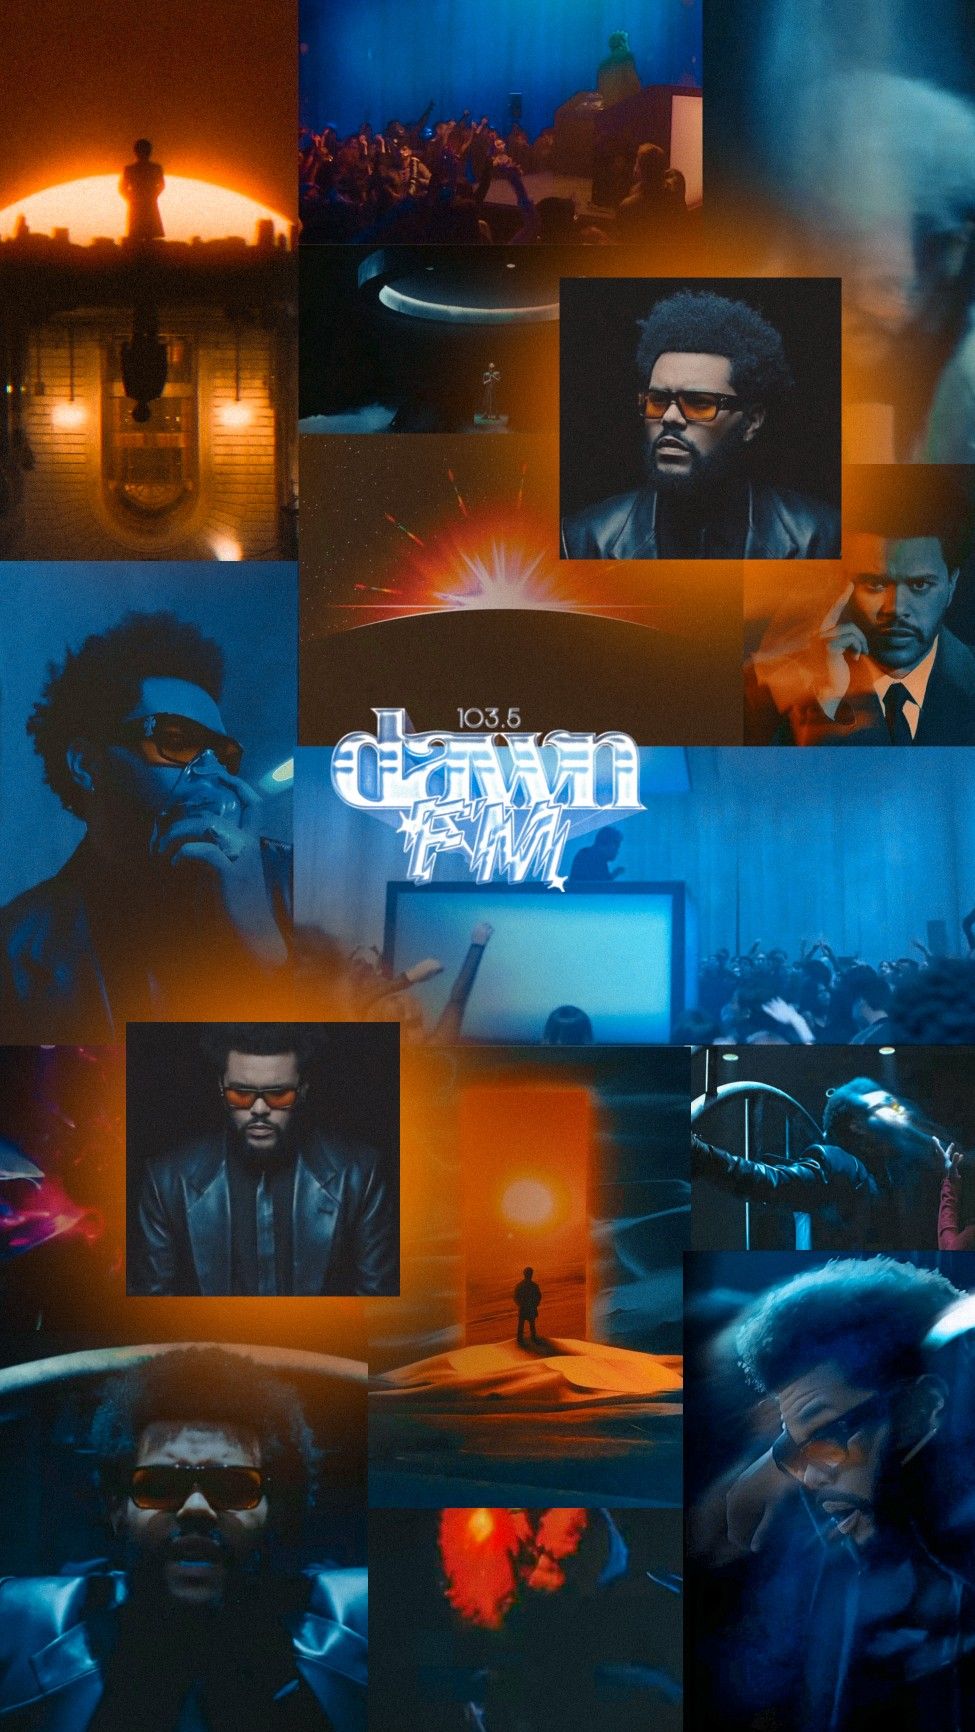 The weeknd dawn fm. The weeknd wallpaper iphone, The weeknd background, The weeknd poster